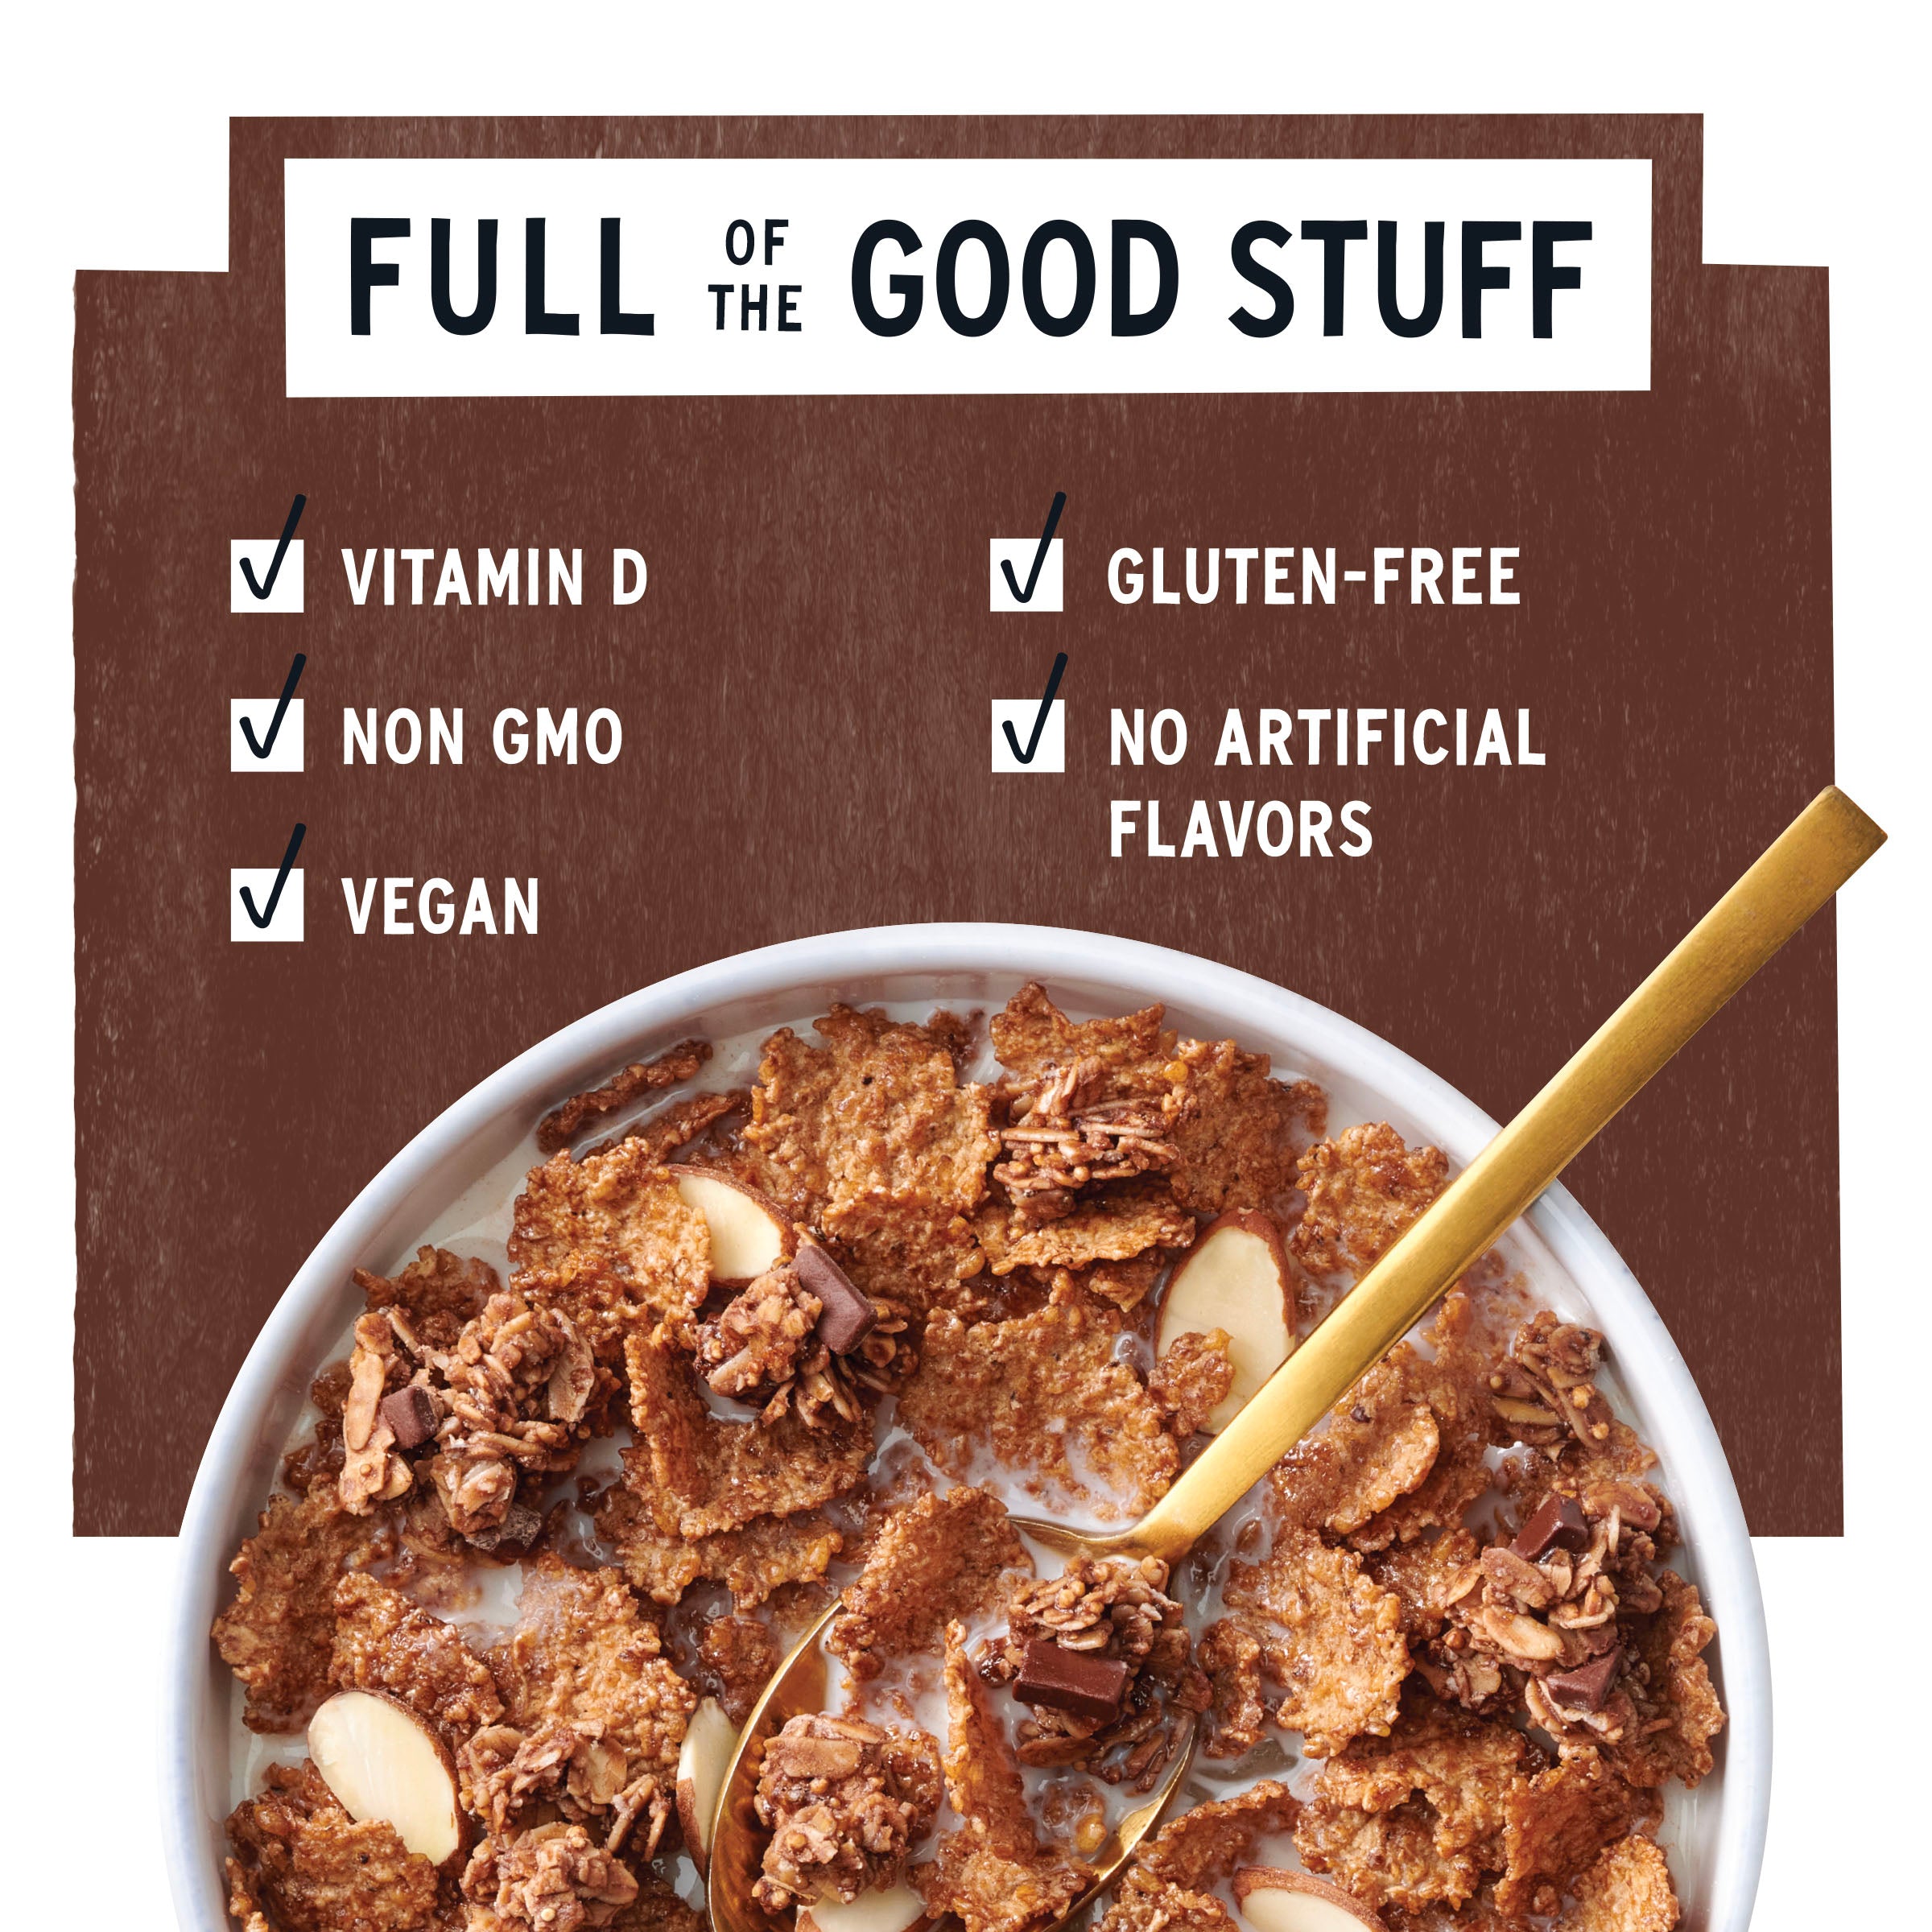 Chocolate Almond Superfood Cereal with Vitamin D